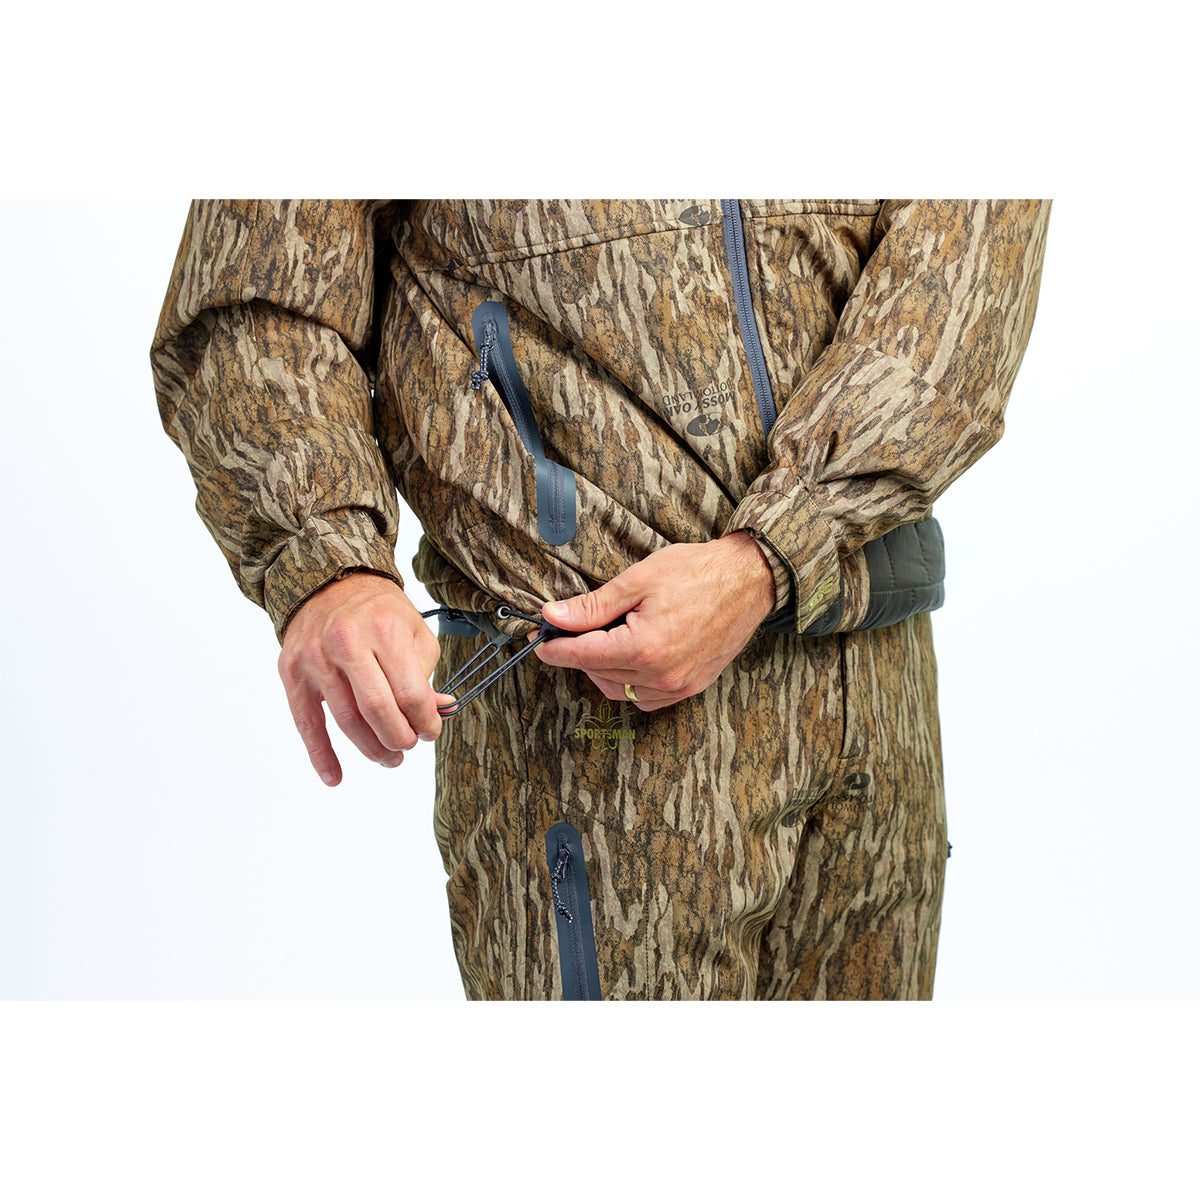 Outbound Insulated Hoodie | Insulated Hoodie | Sportsman Gear